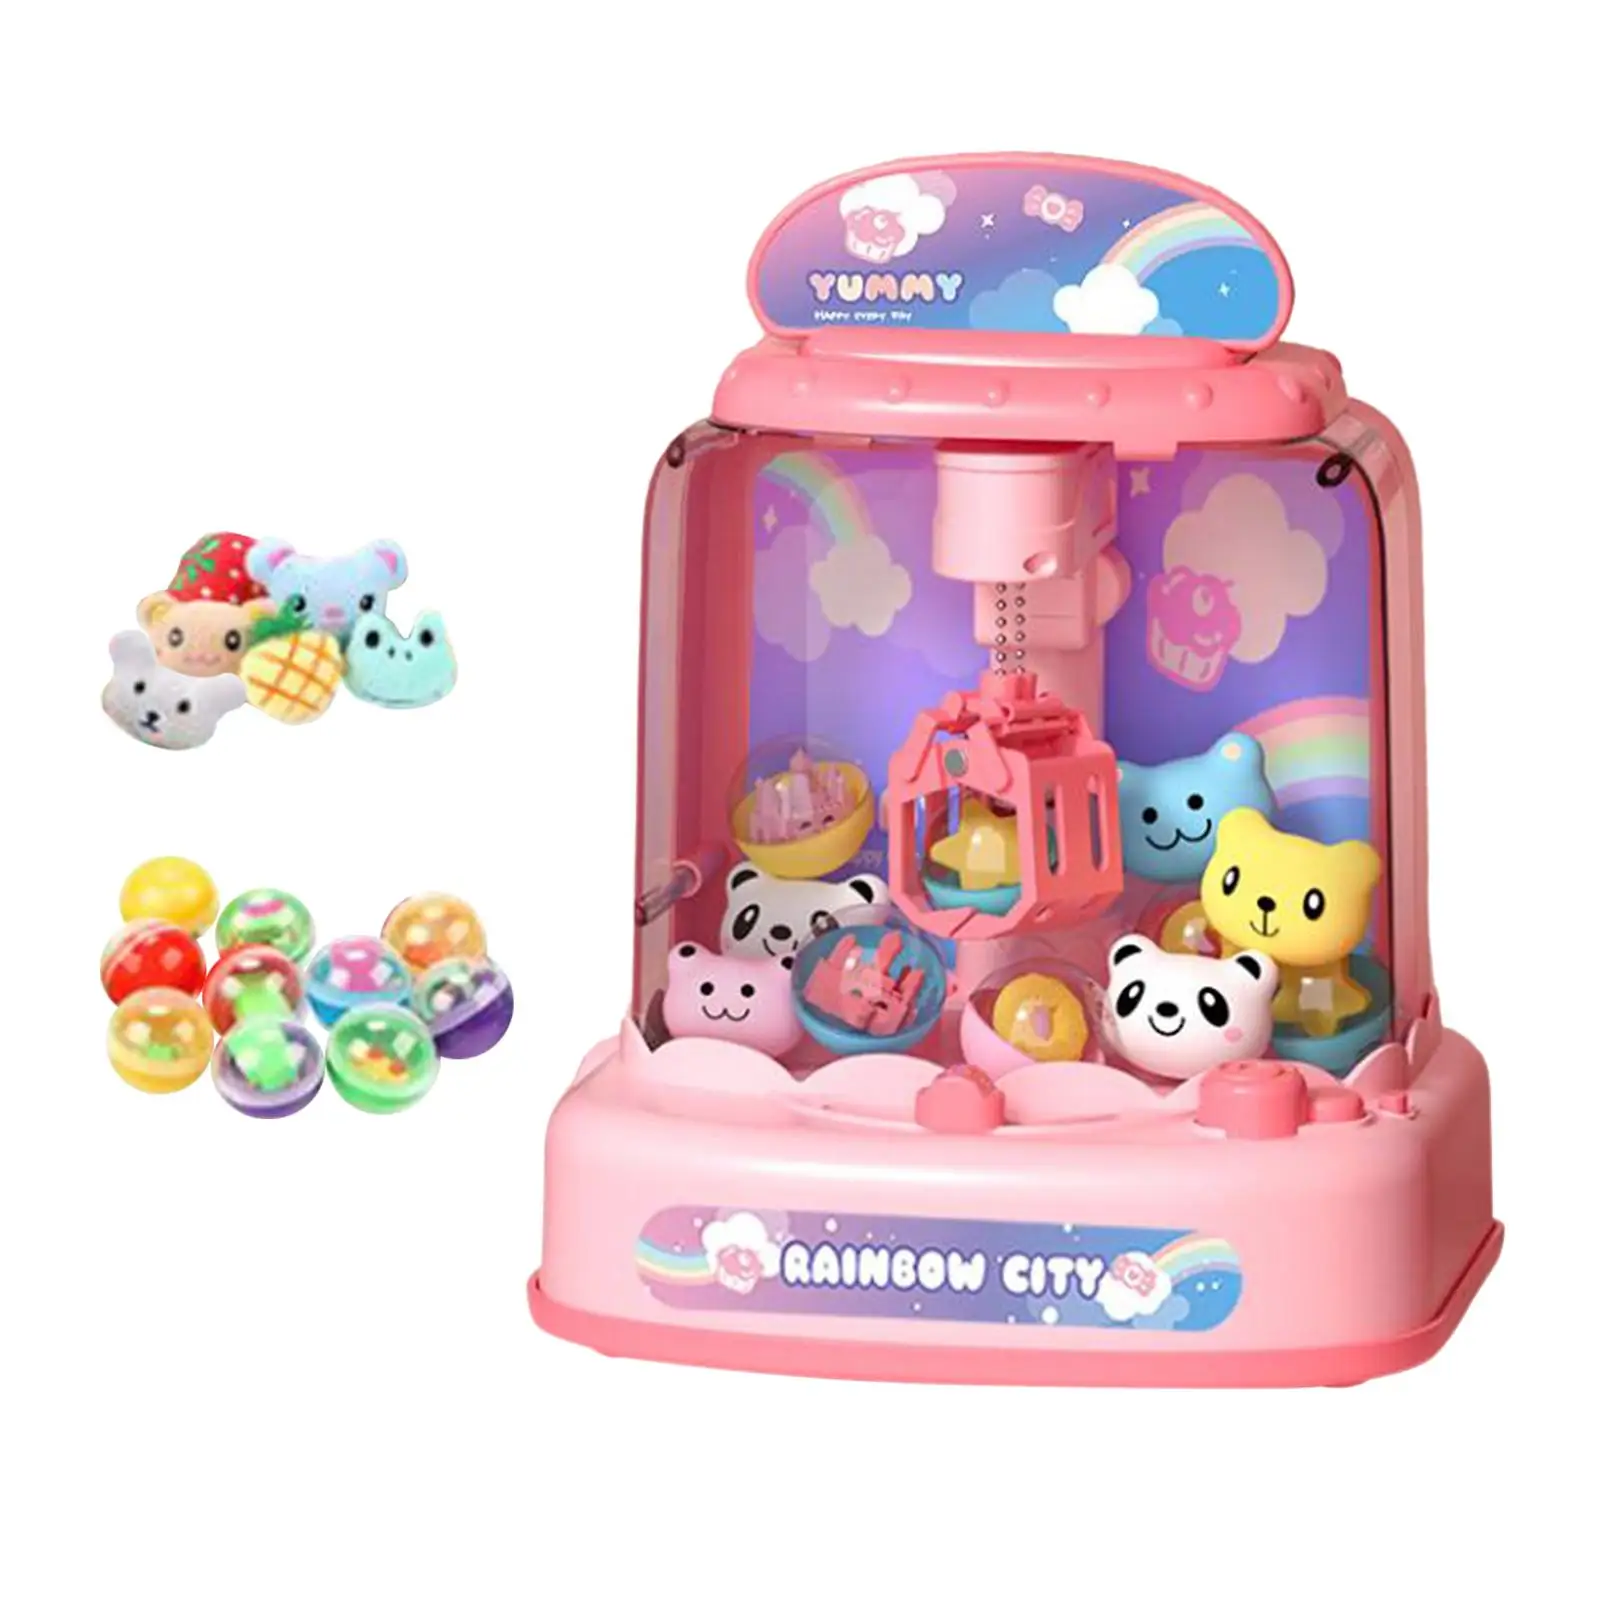 Kids Claw Machine Party Favors Indoor Toy Arcade Claw Game Doll Machine with Sounds for Girls Kids Boys Children Birthday Gifts